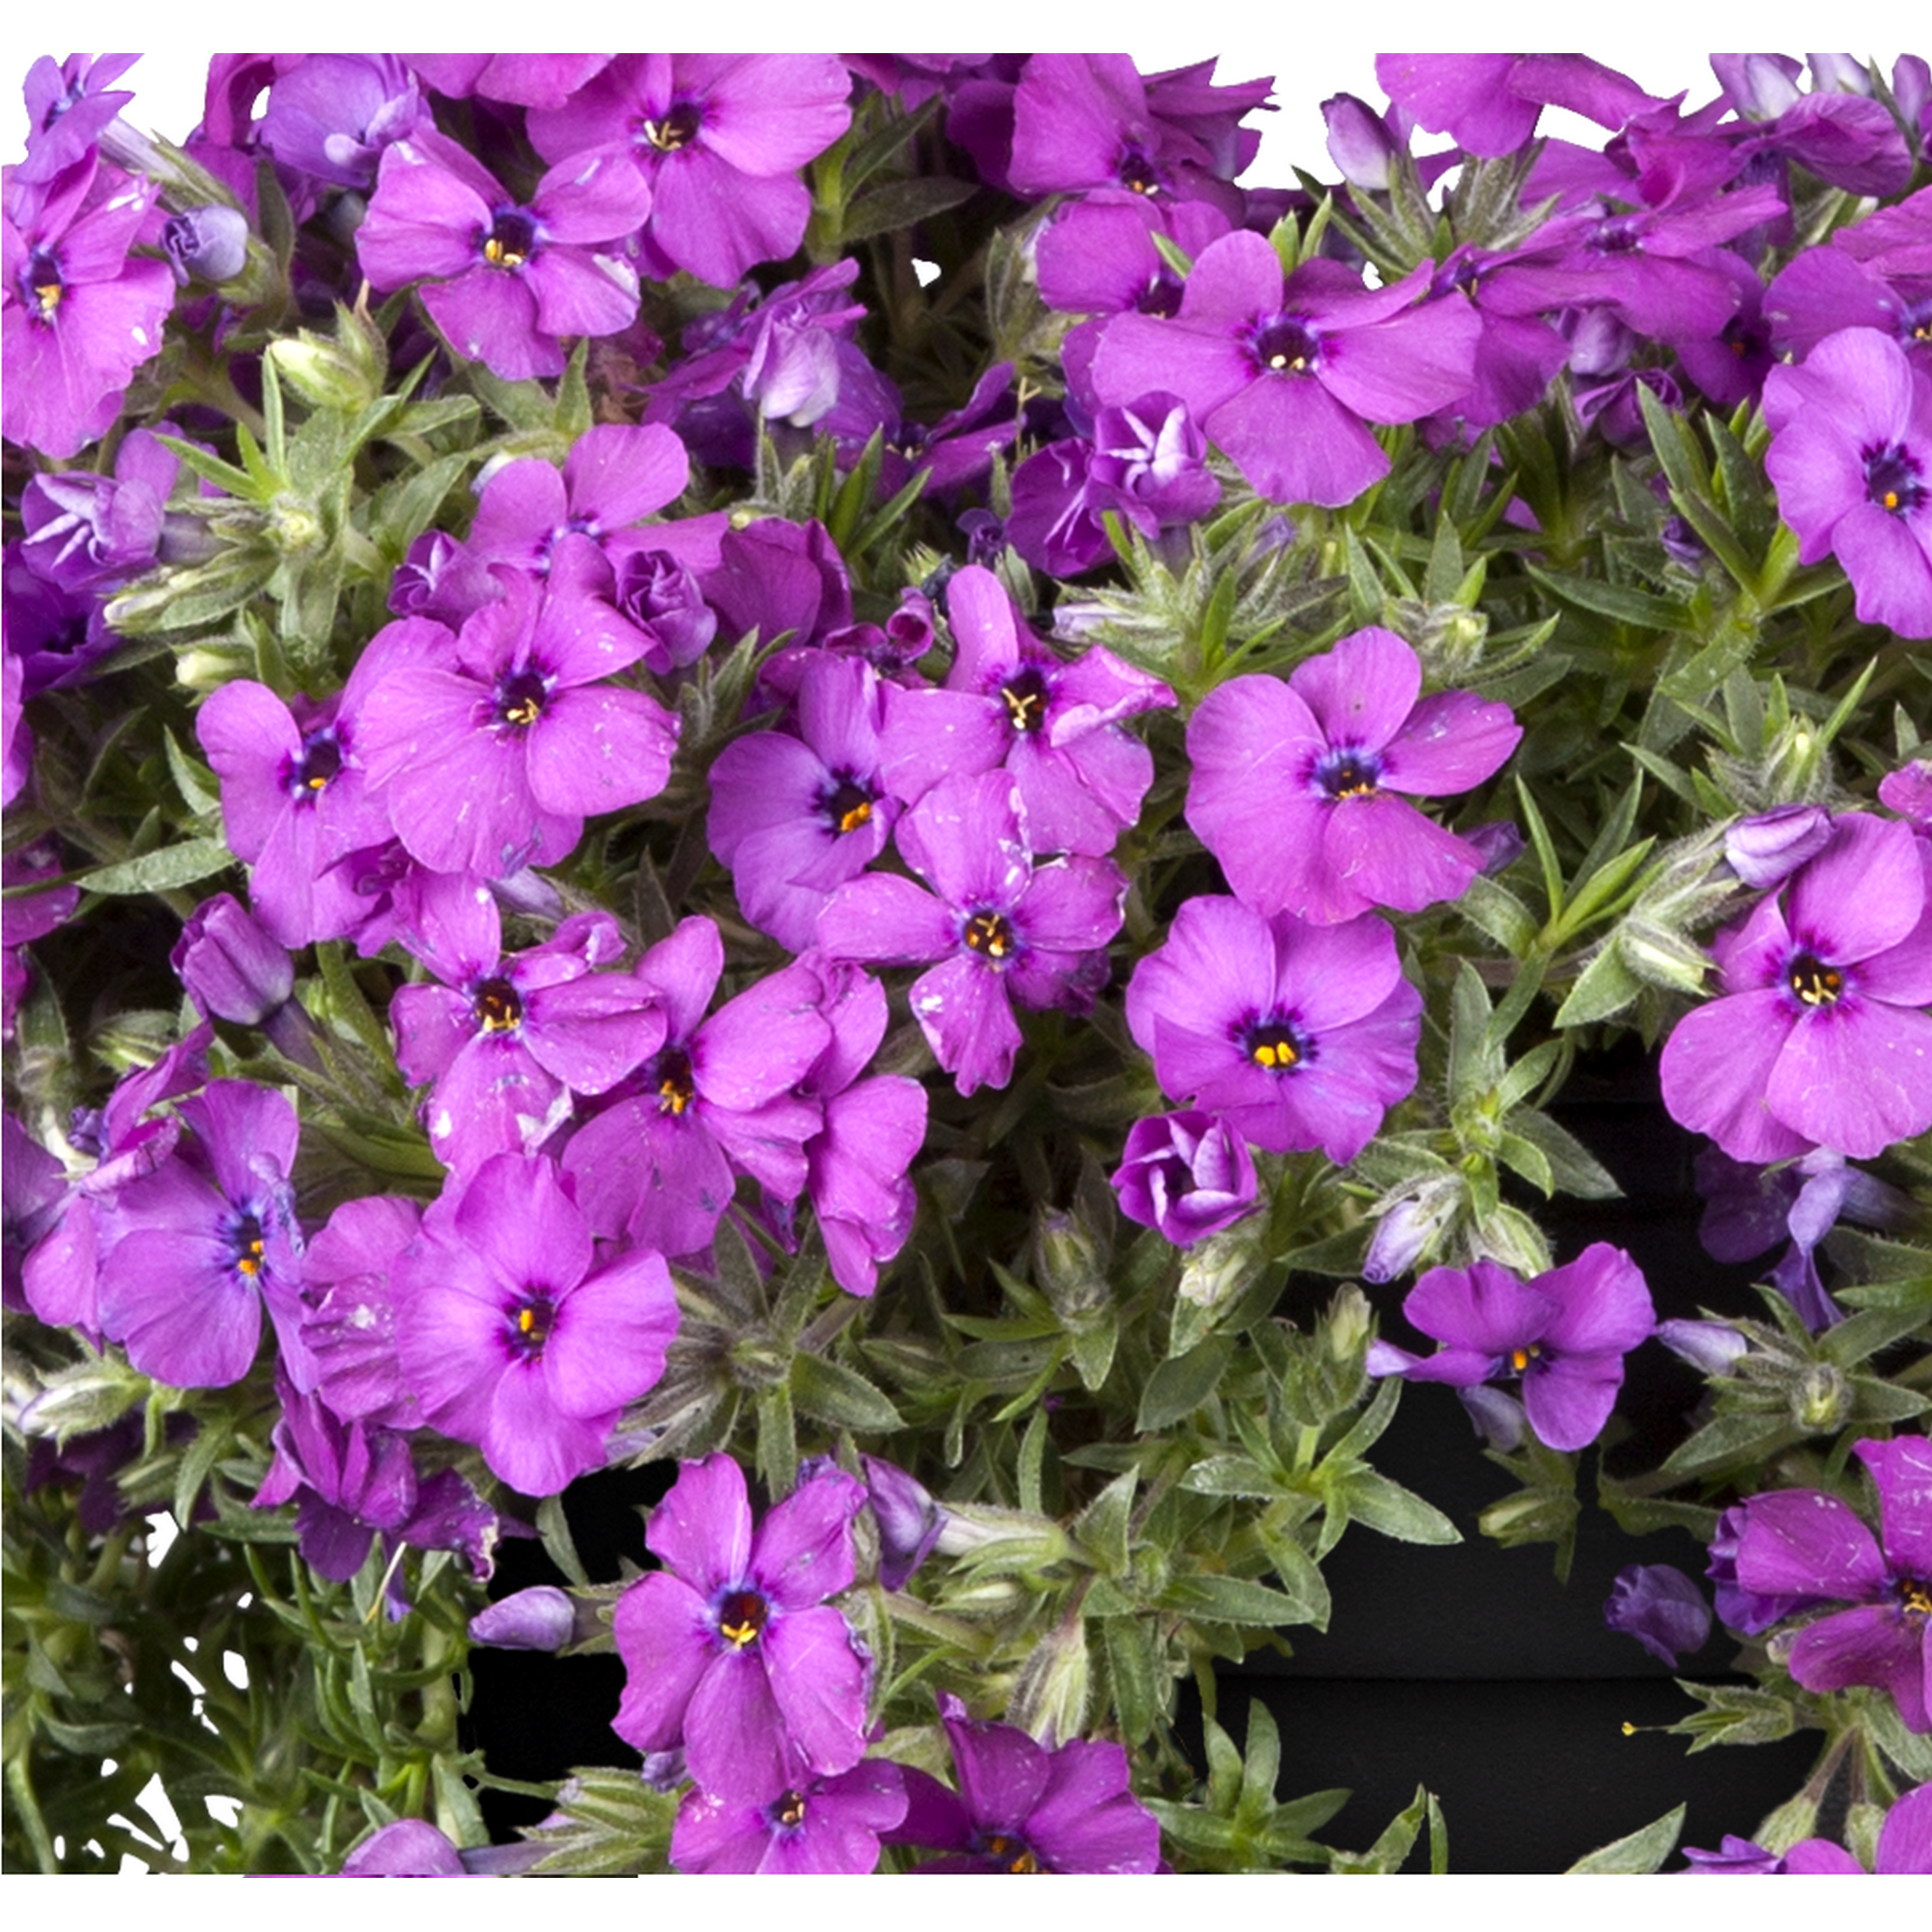 Polsterphlox, 9 cm Topf, 3er-Set + product picture